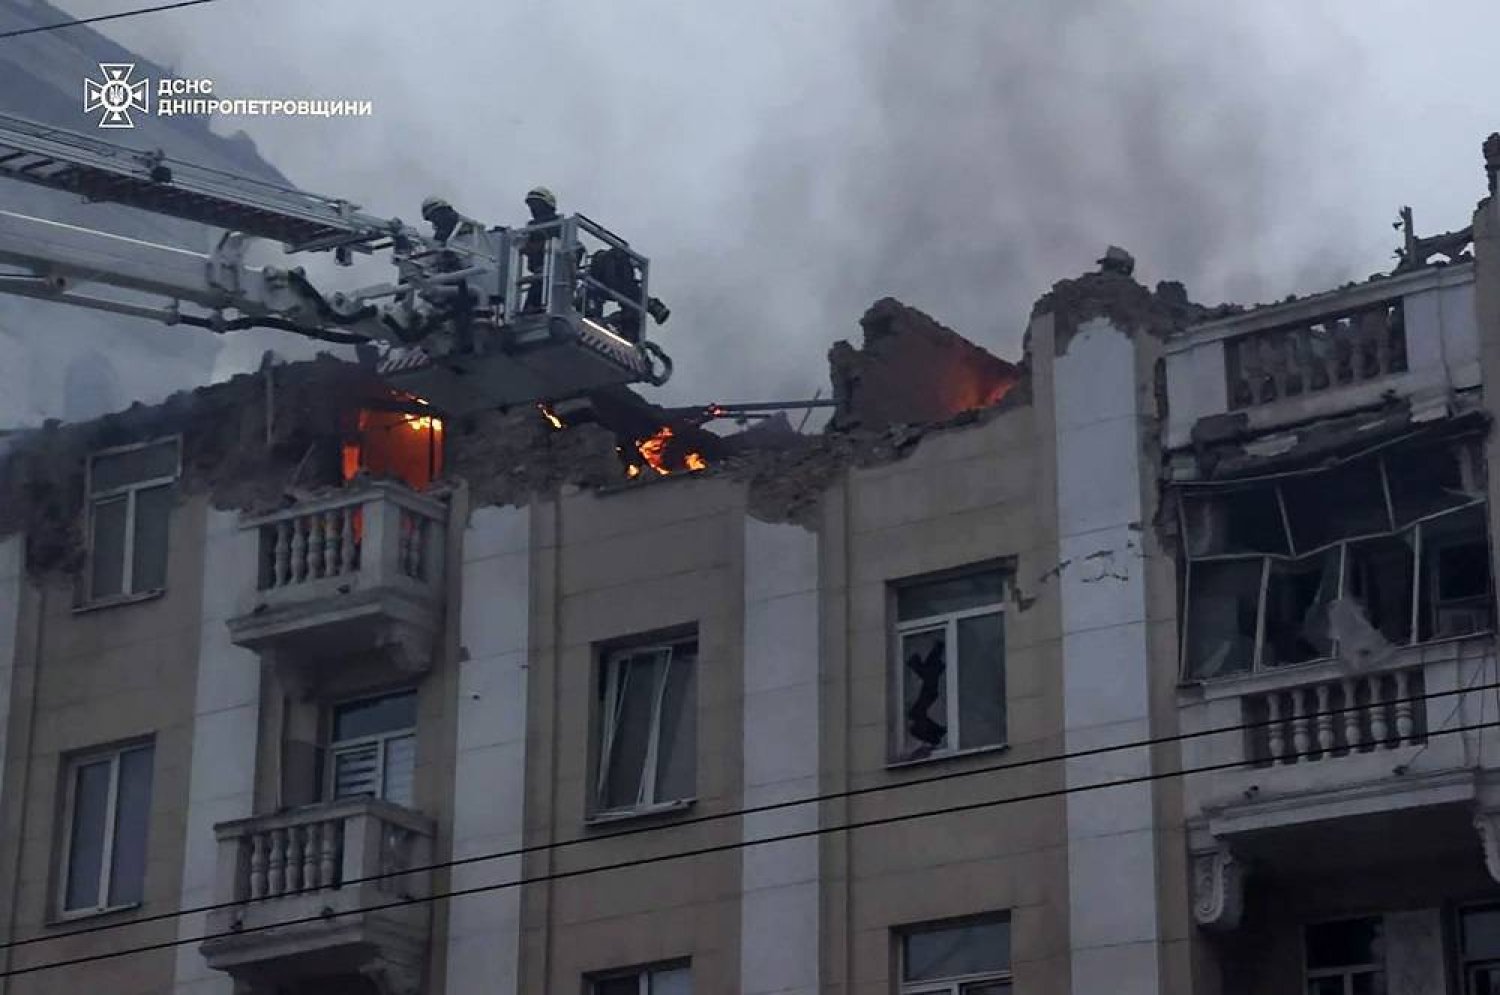 A handout photo made available by the State Emergency Service shows Ukrainian rescuers working at the site of a rocket attack on a residential building in the city of Dnipro, Dnipropetrovsk region, southeastern Ukraine, 19 April 2024, amid the Russian invasion. (EPA/State Emergency Service Handout Handout)